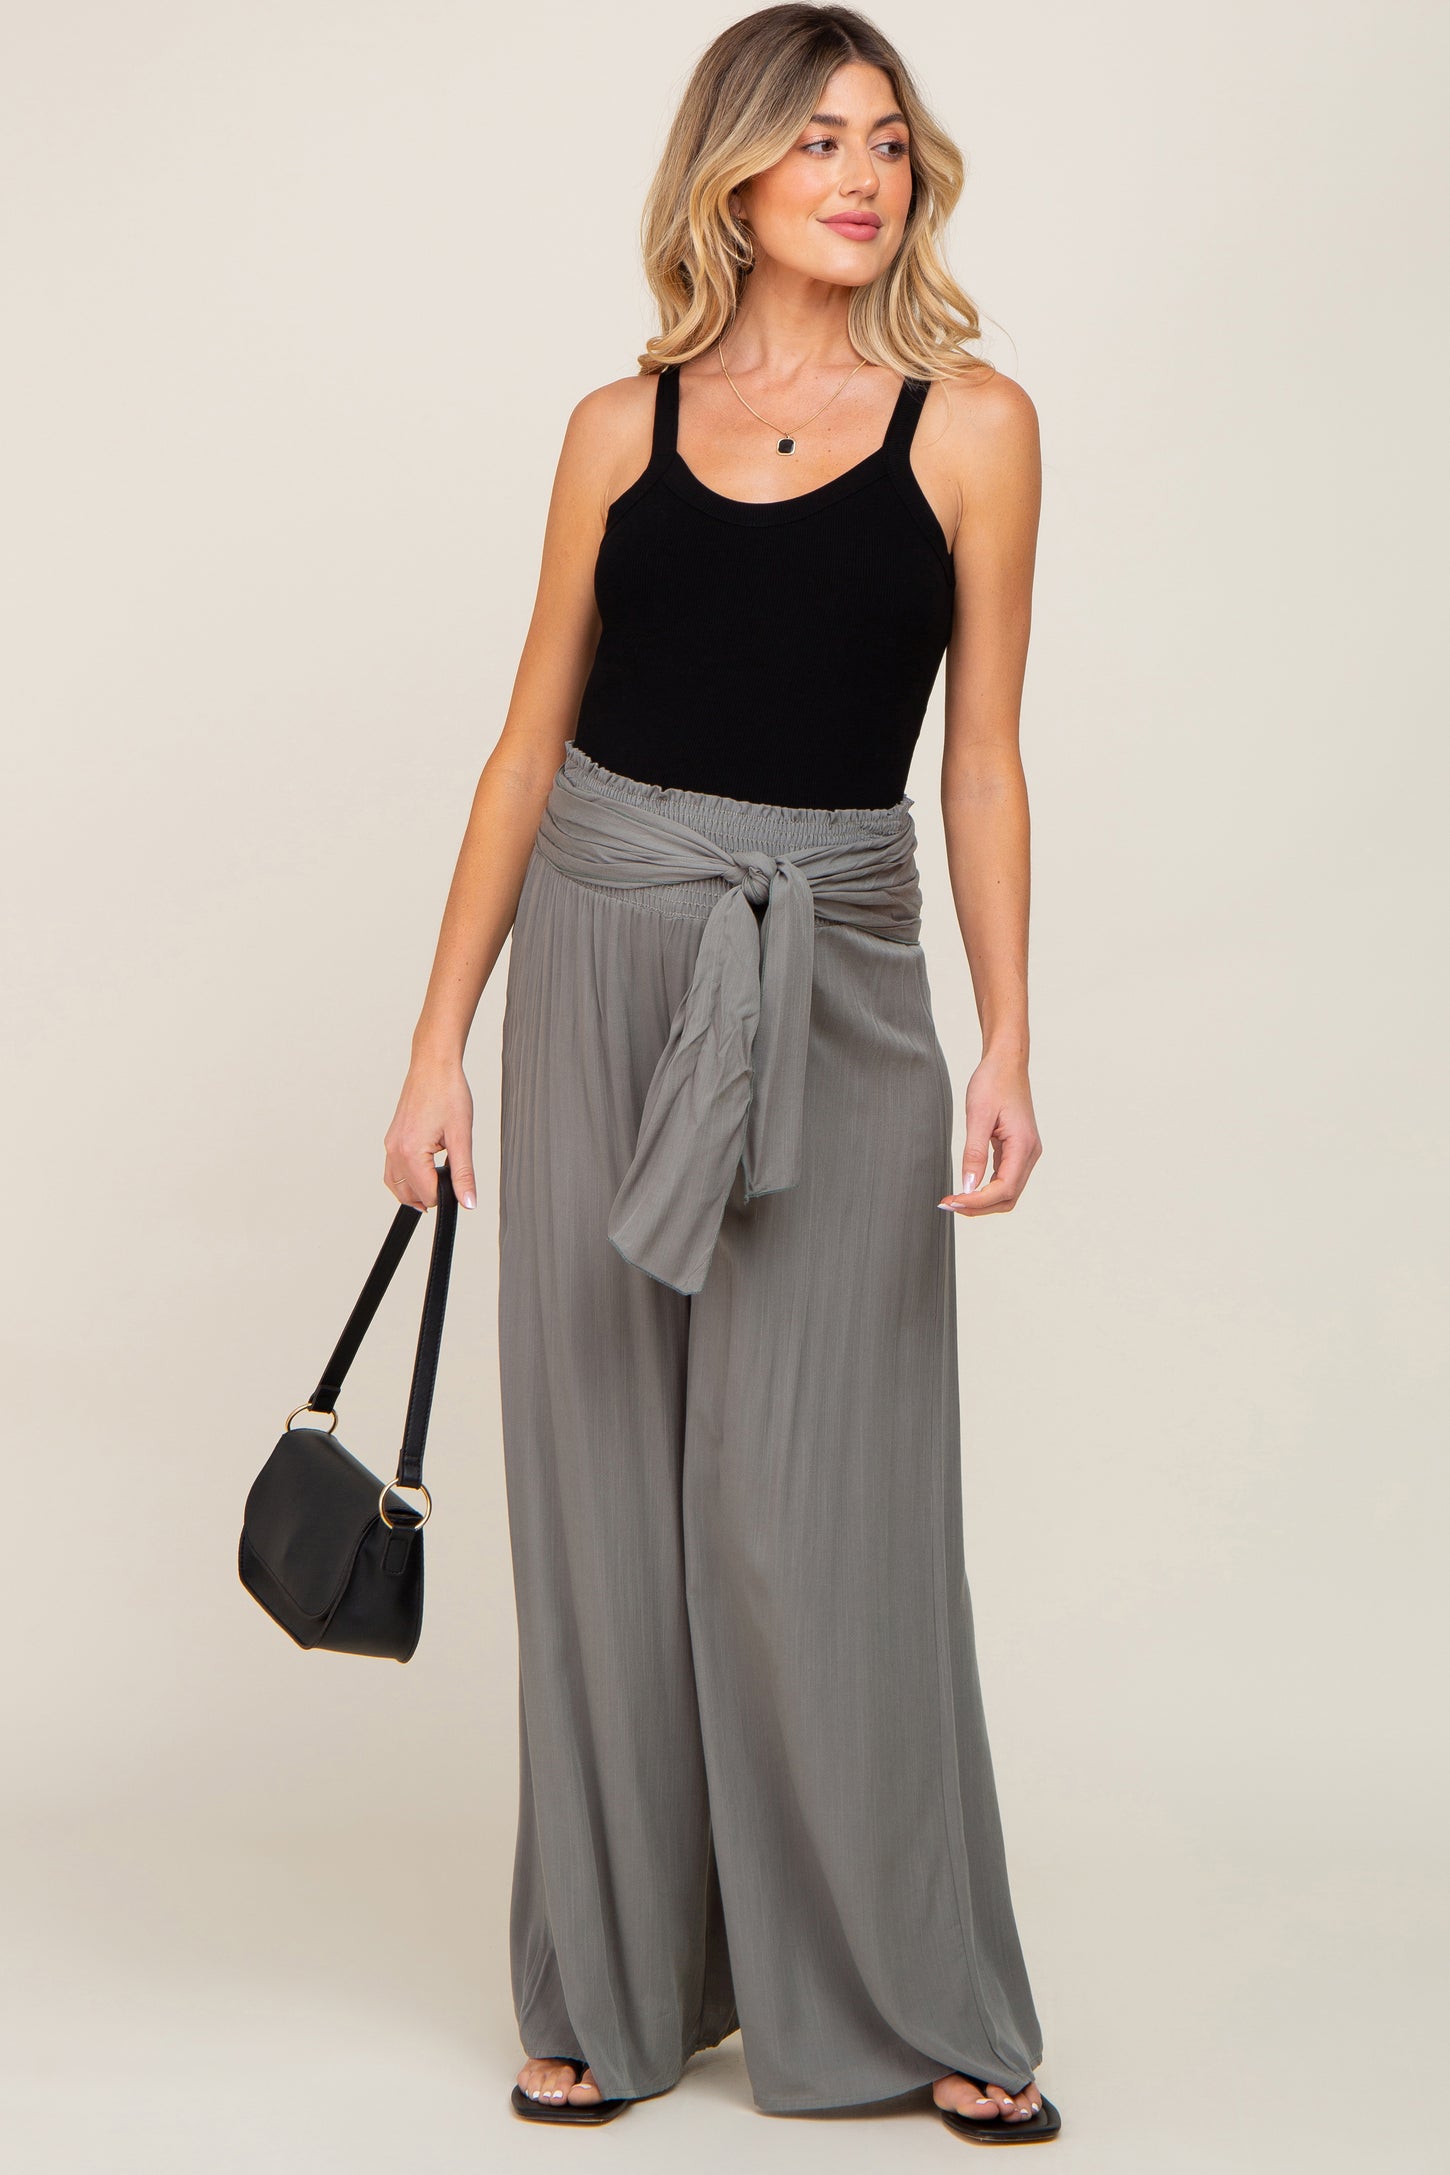 Morph Maternity - White Pencil Styled Casual Pant/Maternity Wear/Pregnancy  Wear/Maternity Pants/Pregnancy Pants/Maternity